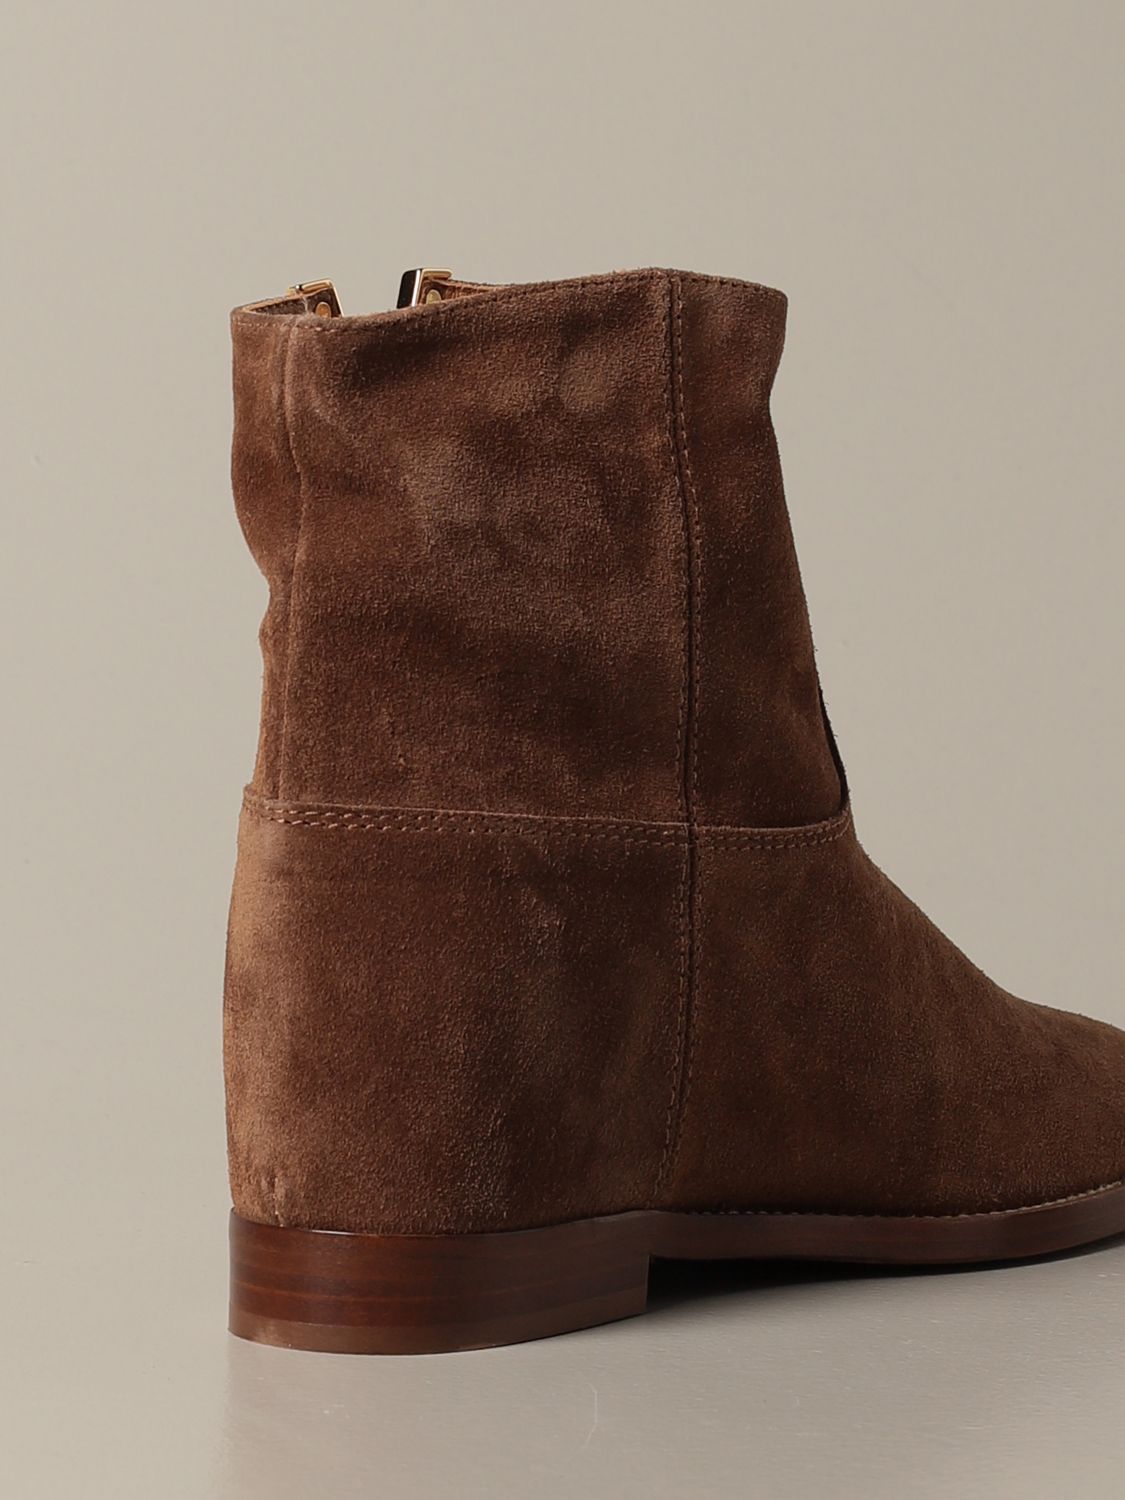 Buy > brown suede flat boots > in stock